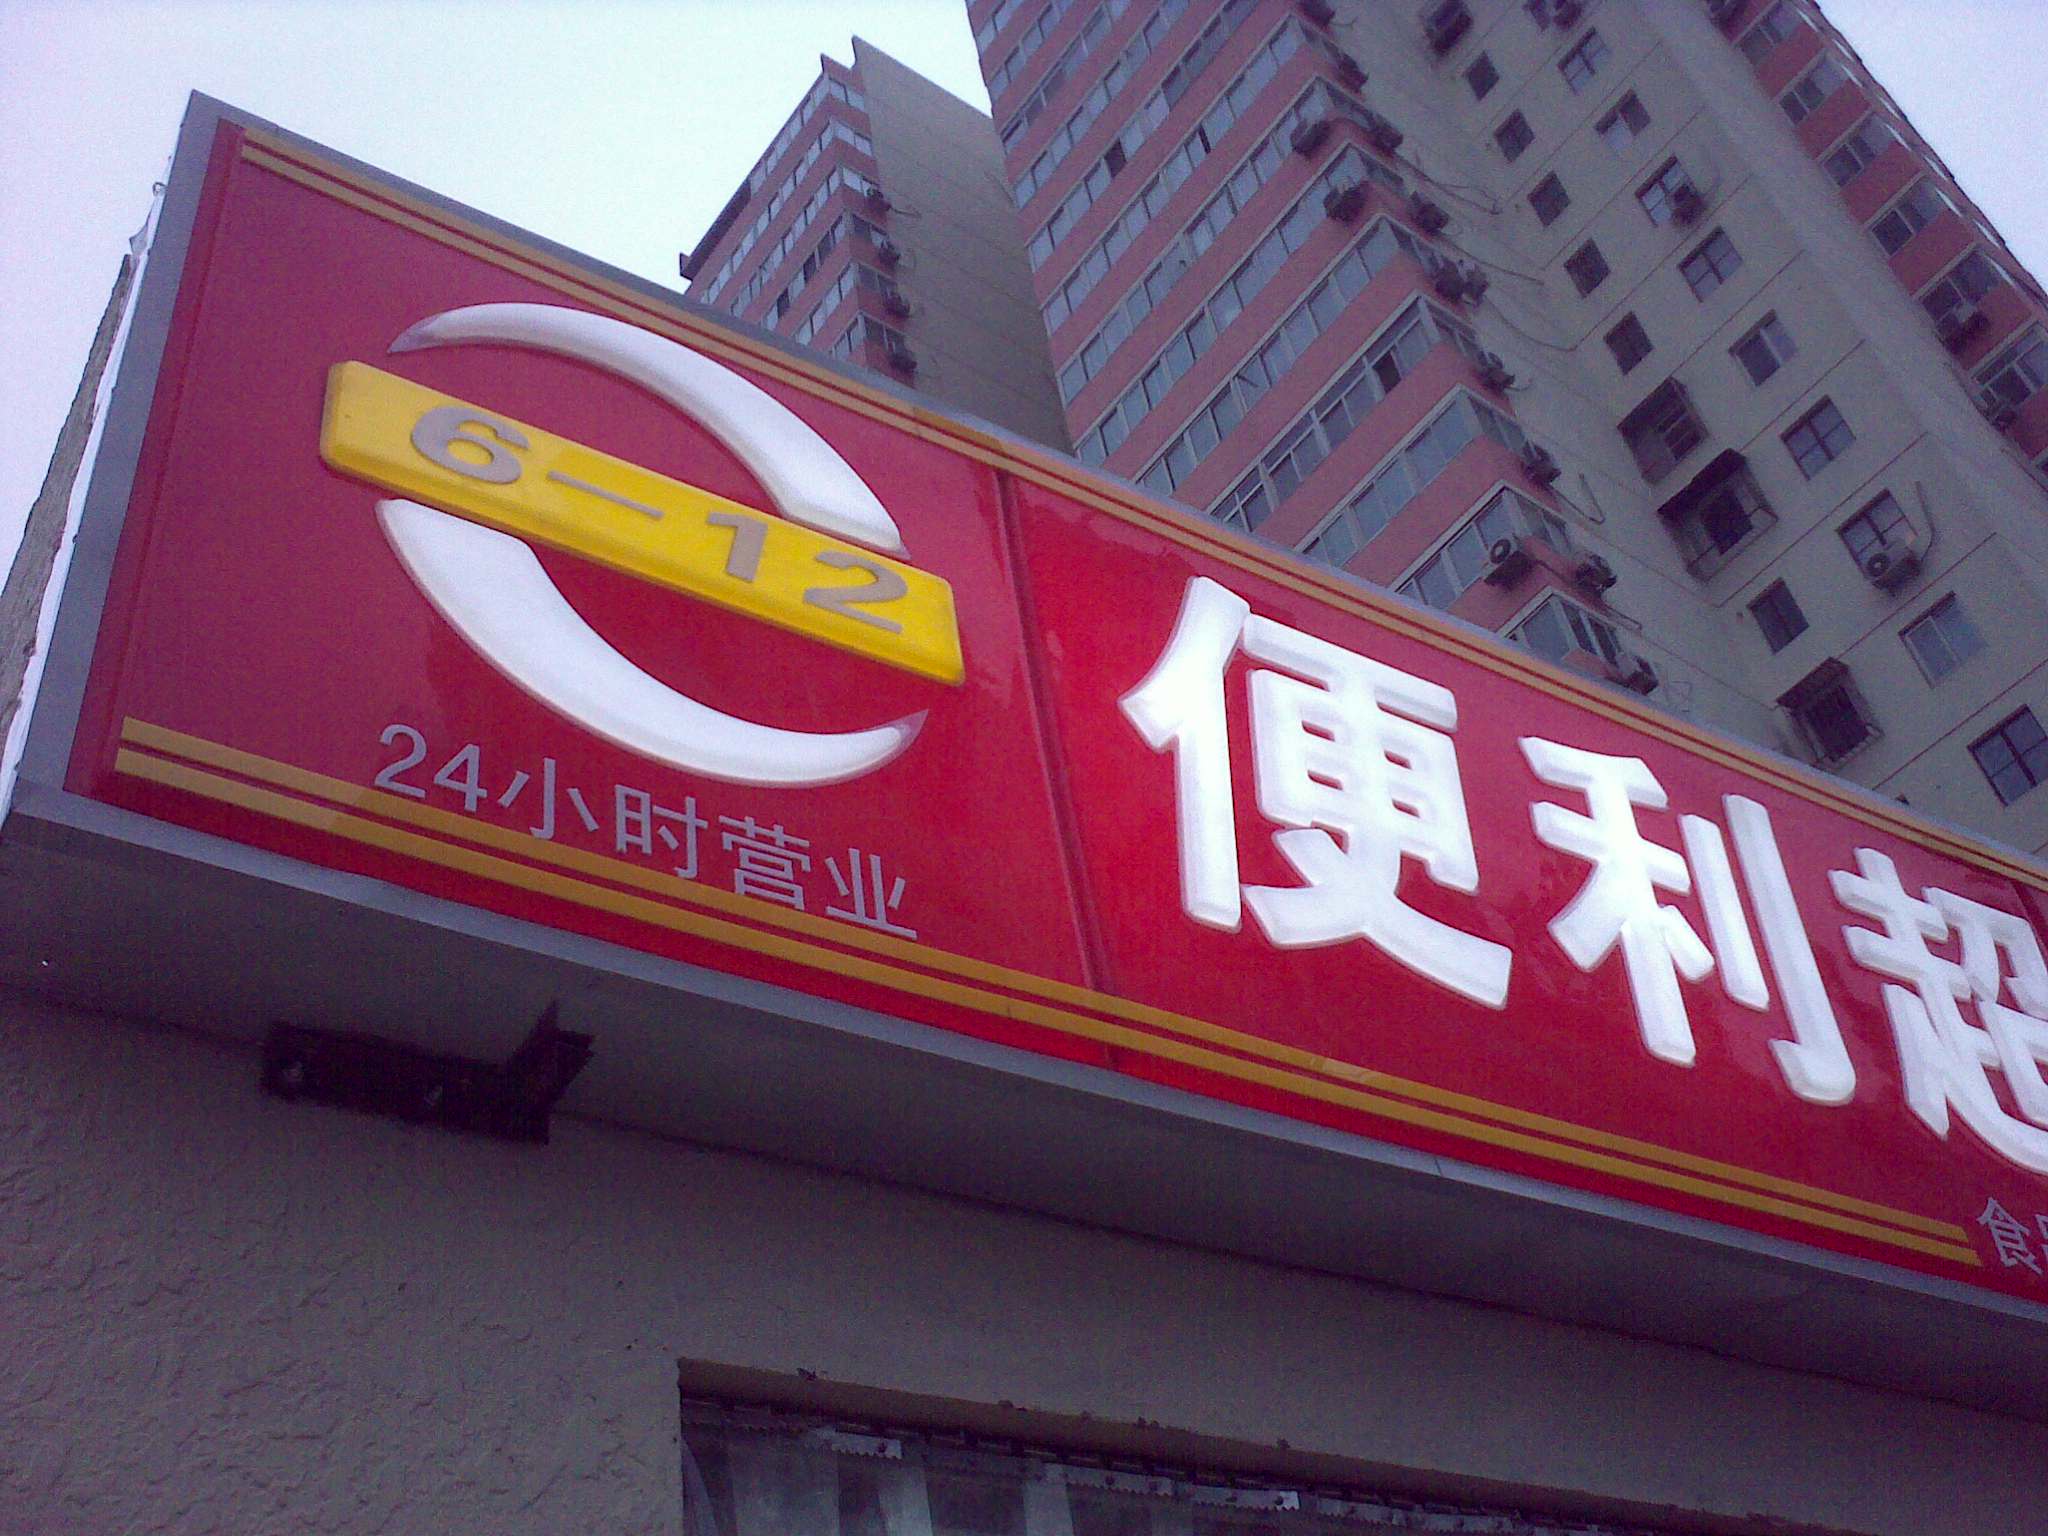 chinese sign and logo on an outside building in asia